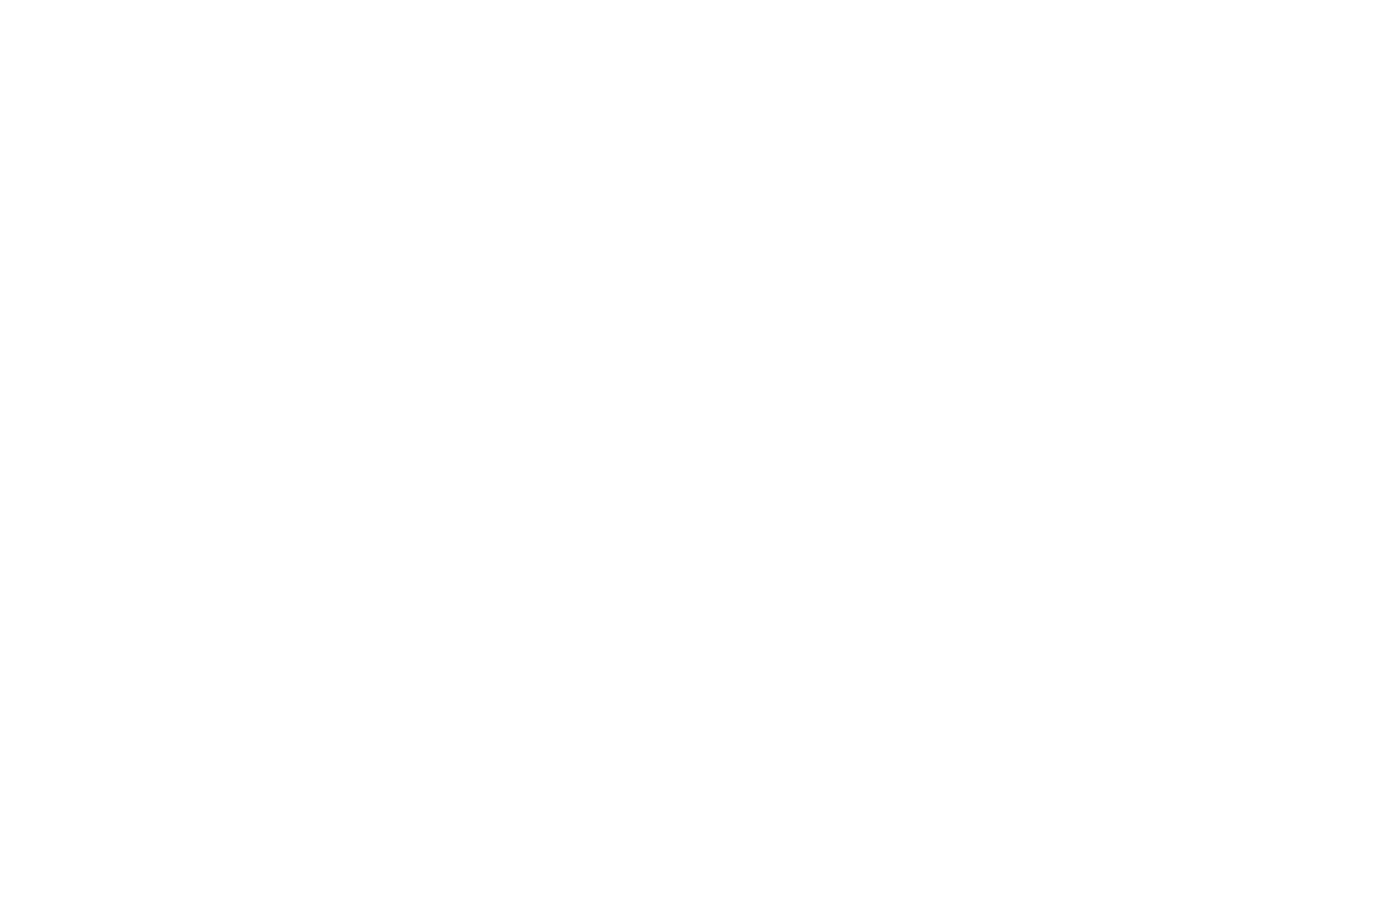 CA Logos_Lime.png